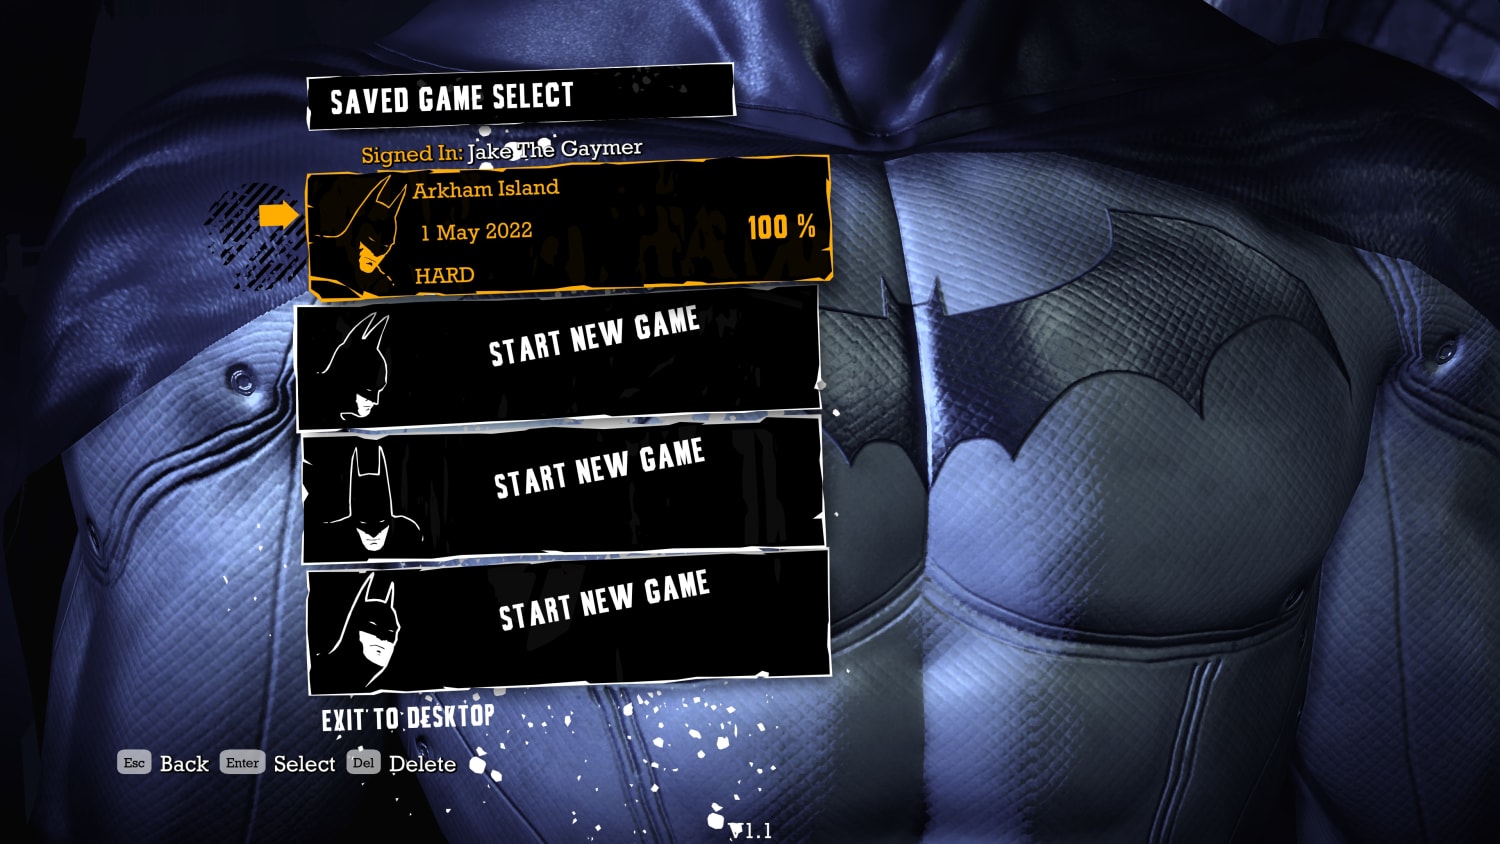 I've been playing Arkham games since I was 13, I've played Arkham City more times than any other game (save maybe Spyro). I've played every difficult, I've played many challenge maps, I've spent hours on these games. Today I sat down and achieved something I've never done before. I'm so proud!